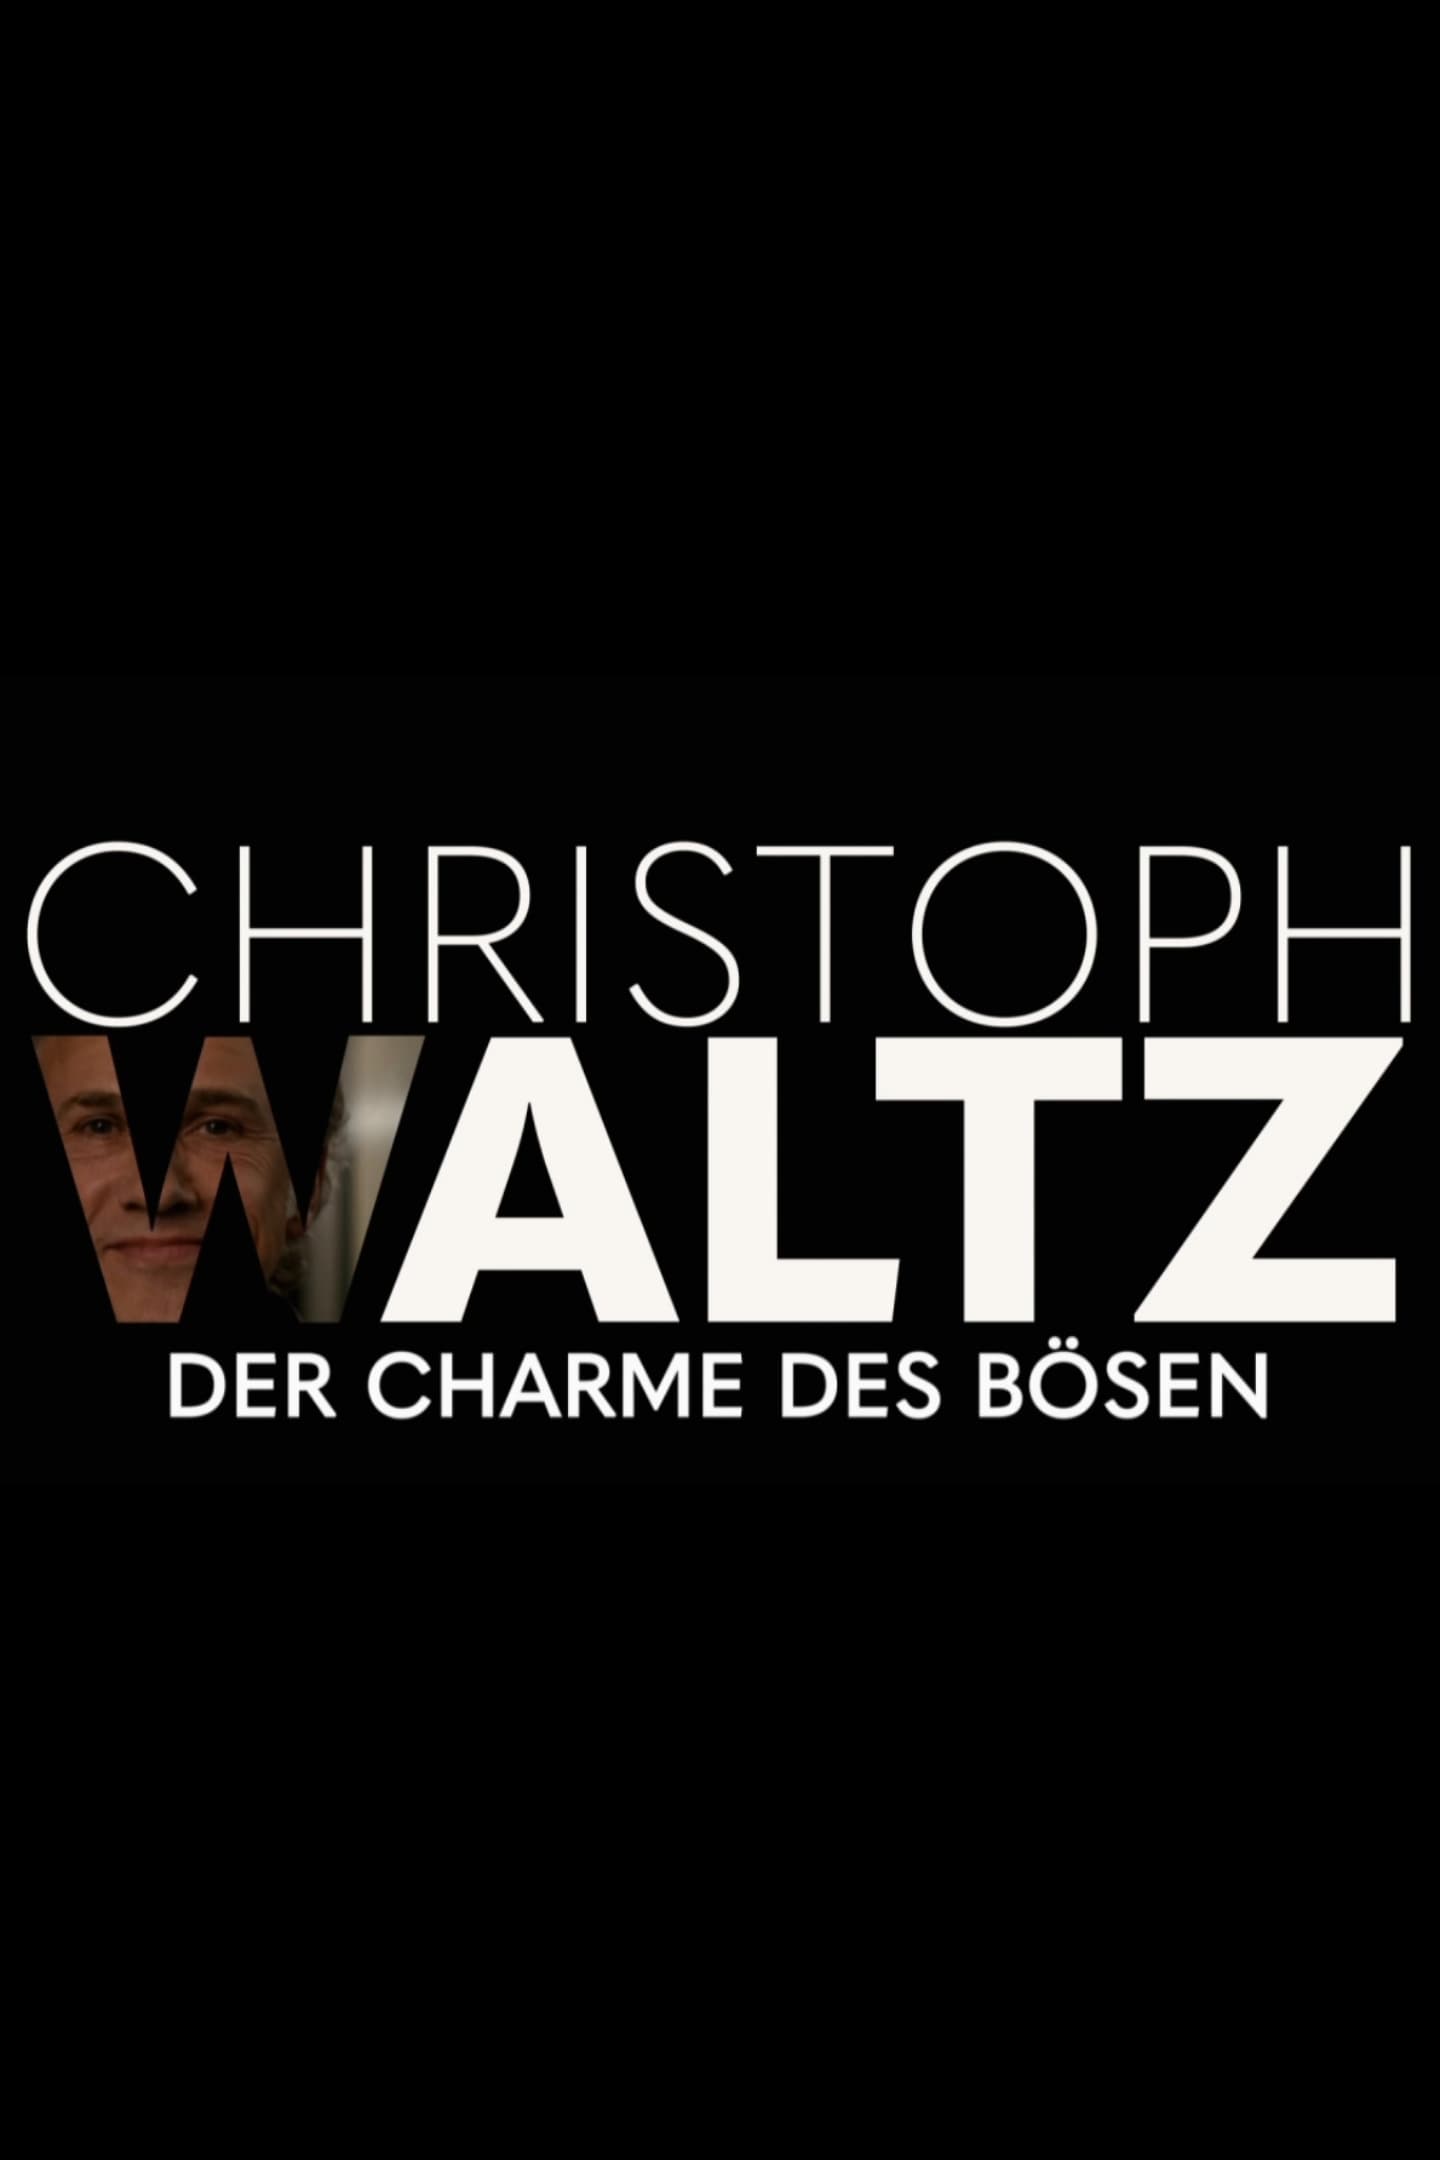 Christoph Waltz - The Charm of Evil (2021)